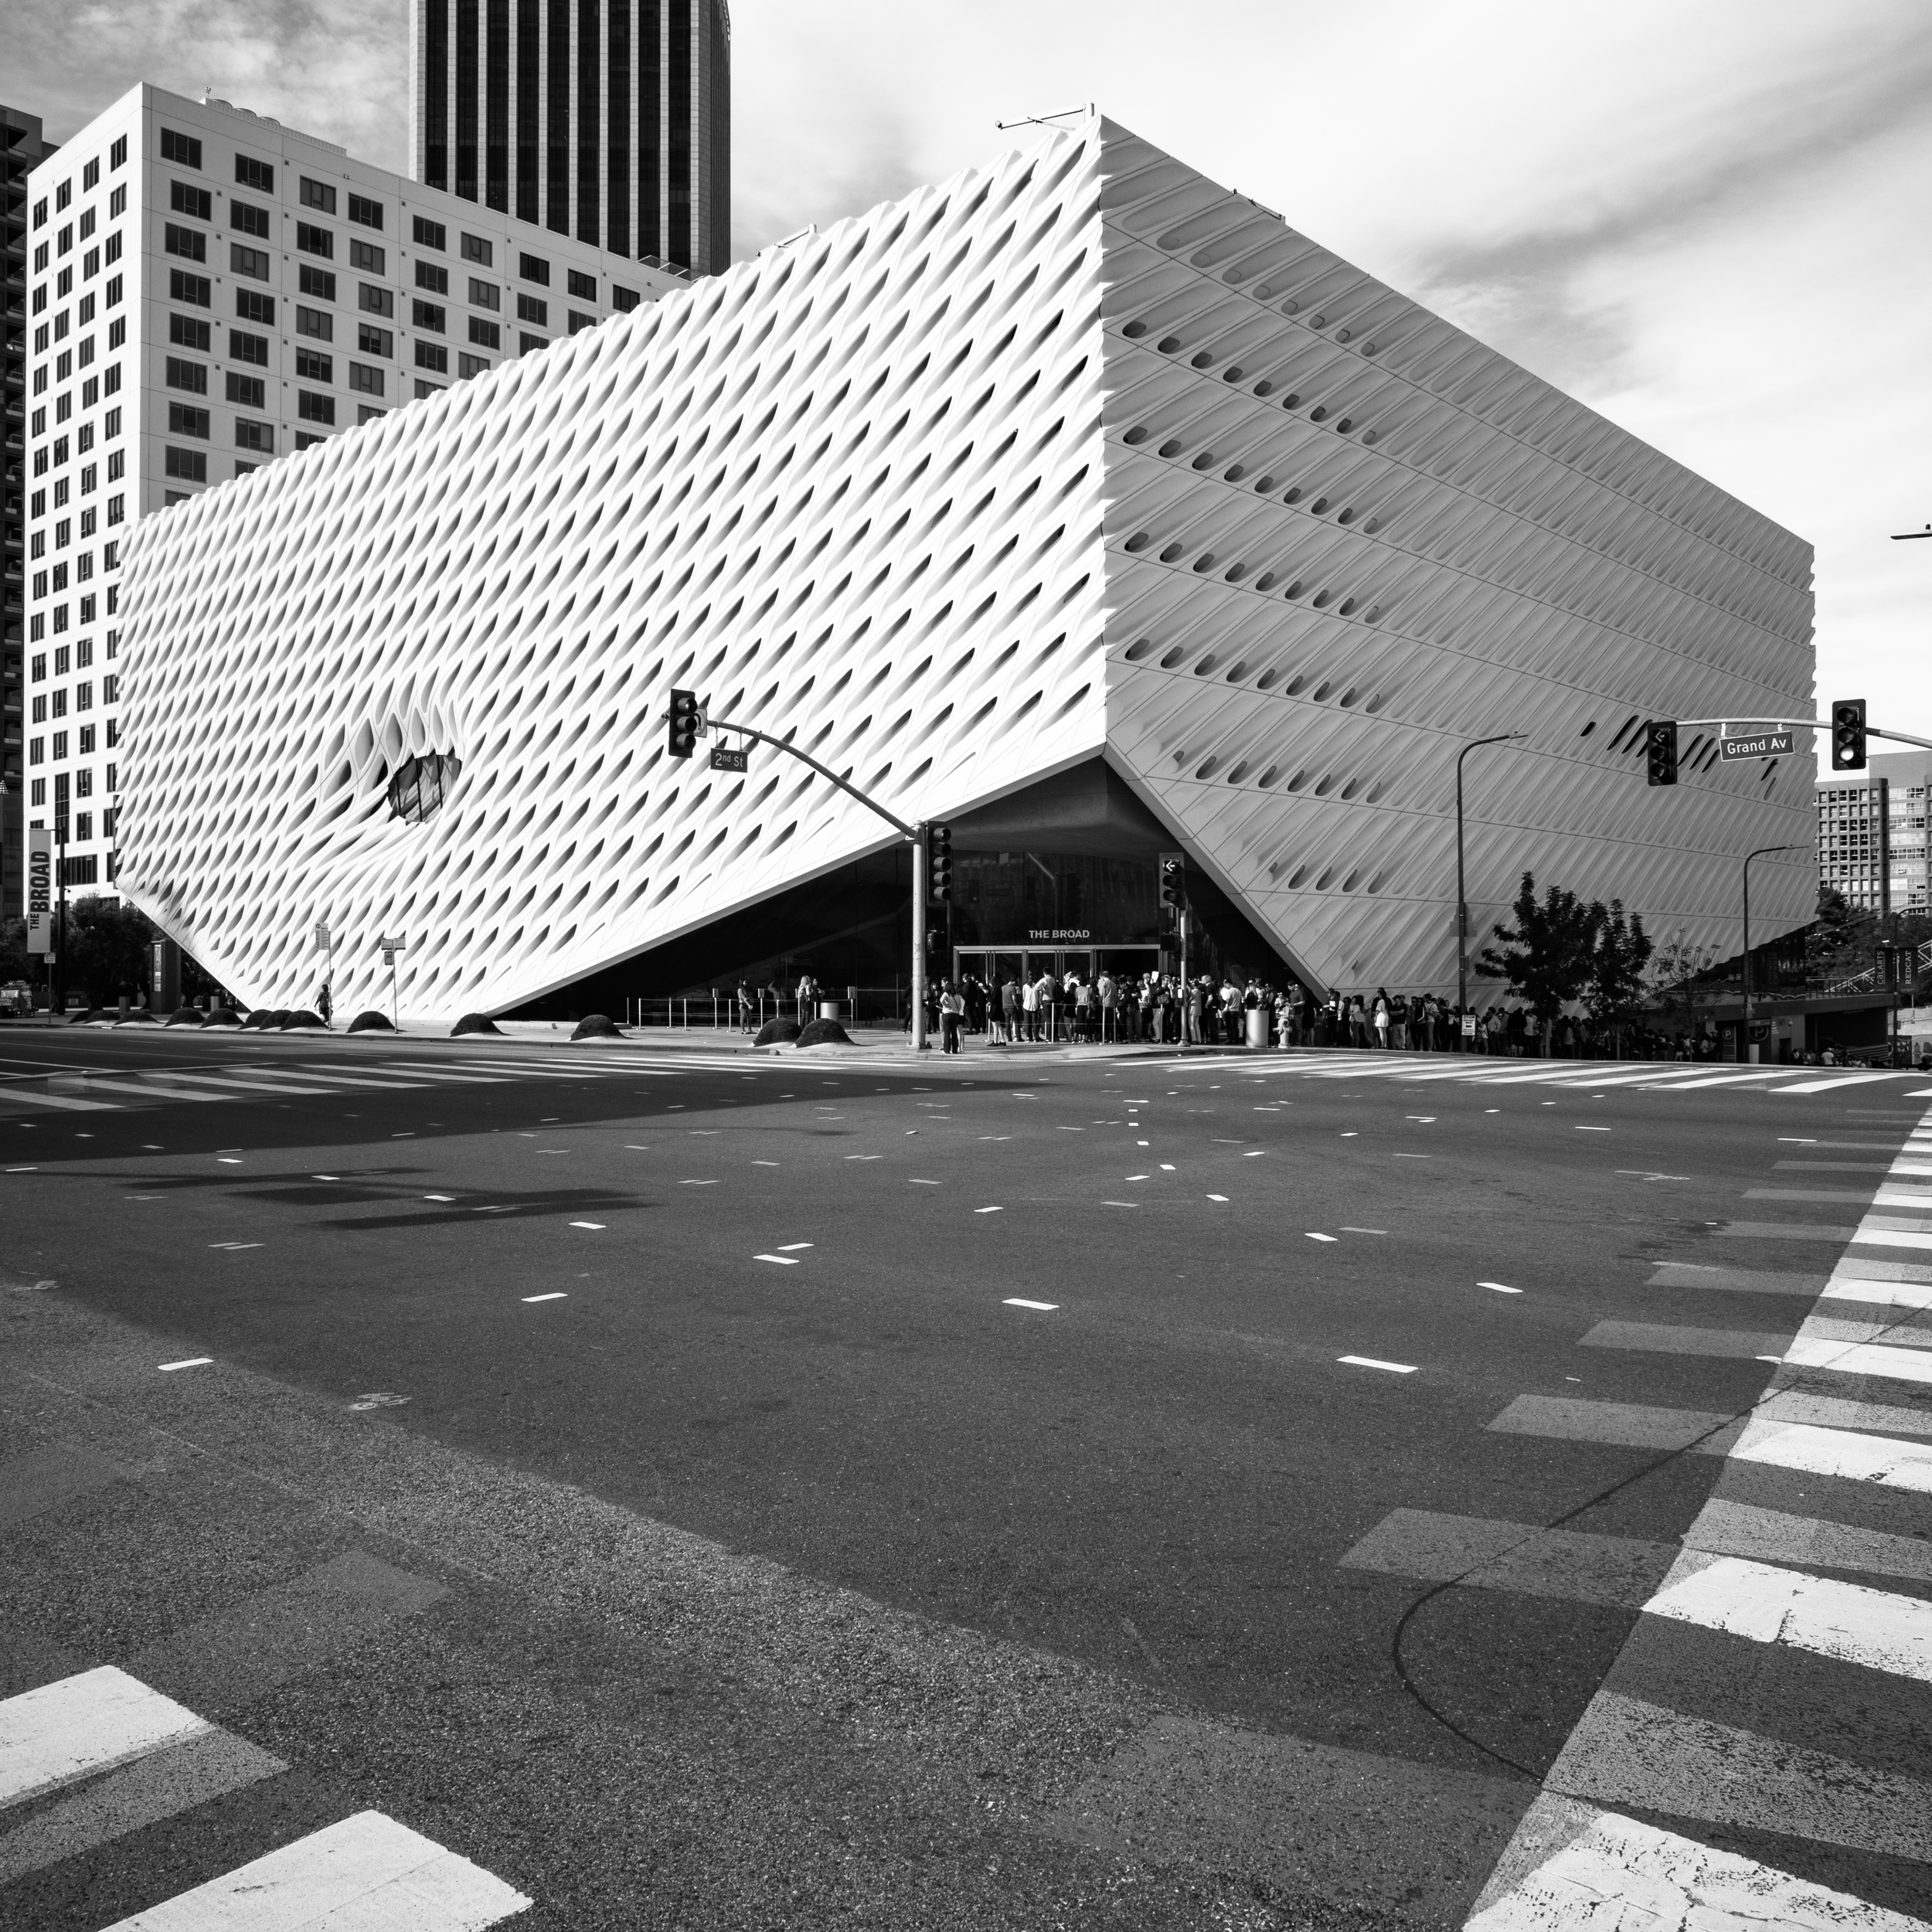 THE BROAD MUSEUM